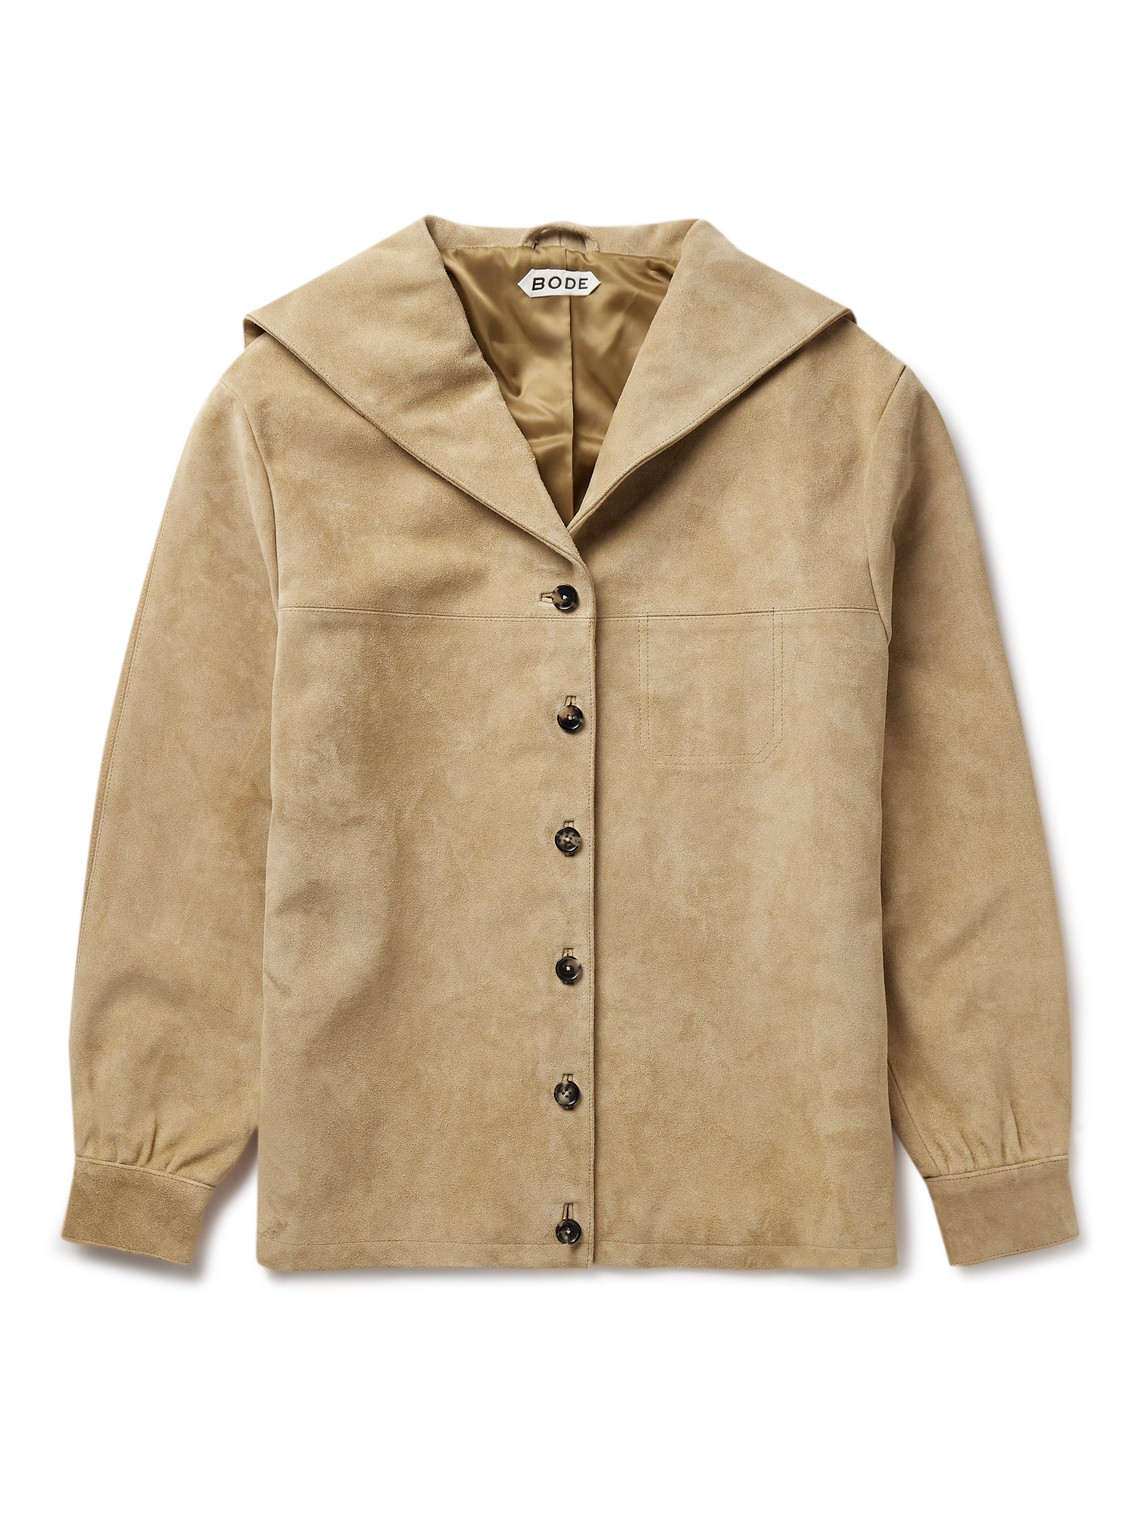 BODE MARINERS PANELLED SUEDE JACKET